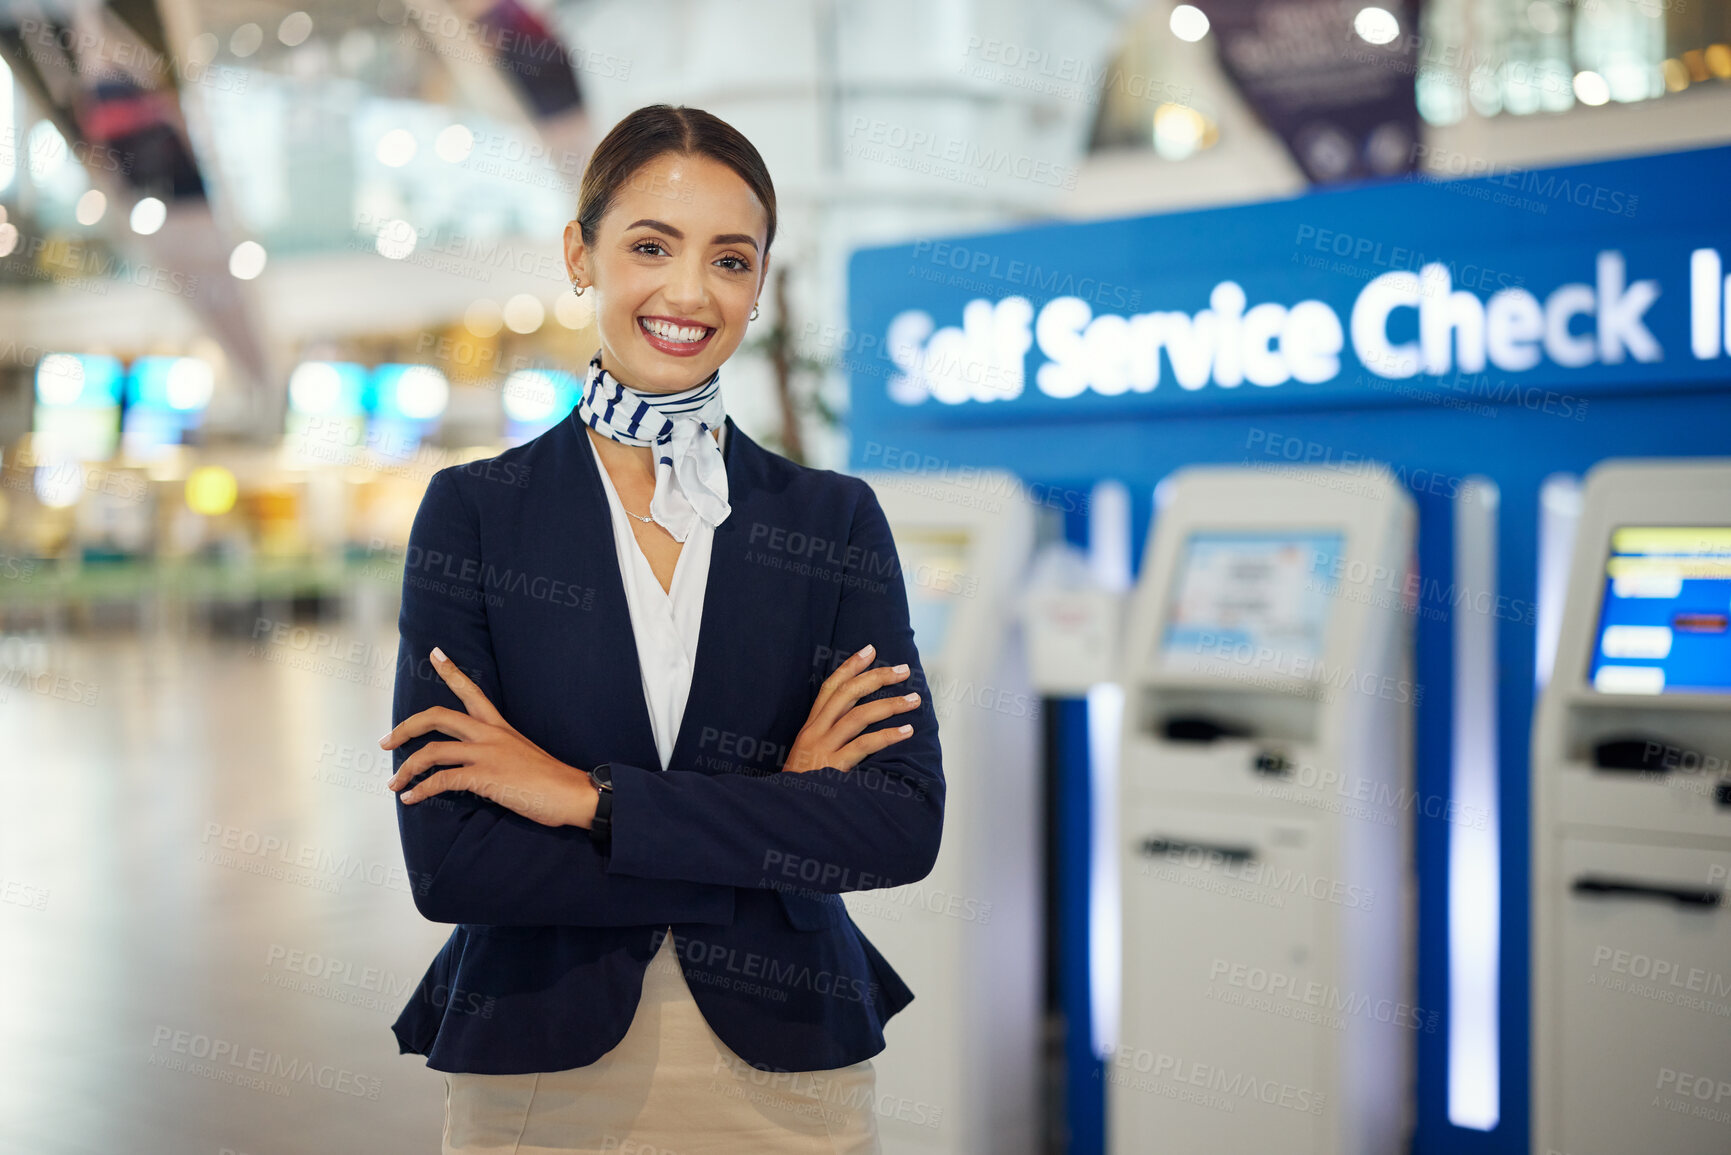 Buy stock photo Woman, passenger assistant and arms crossed at airport by self service check in station for information, help or FAQ. Portrait of happy female services agent standing ready to assist people in travel